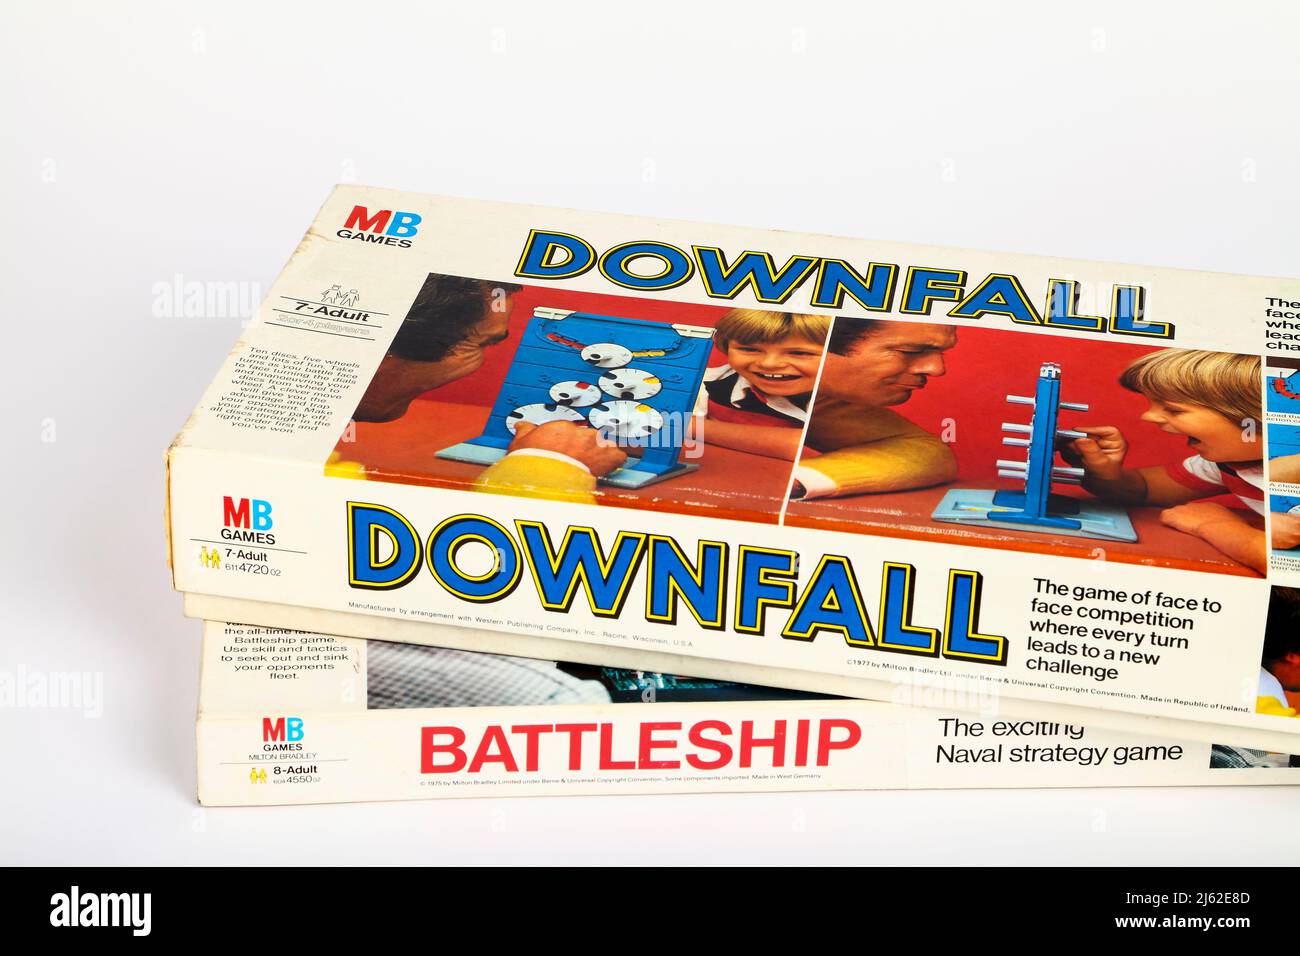 Mb Games Battleship tactical naval war strategy game for two players and Downfall game Stock Photo